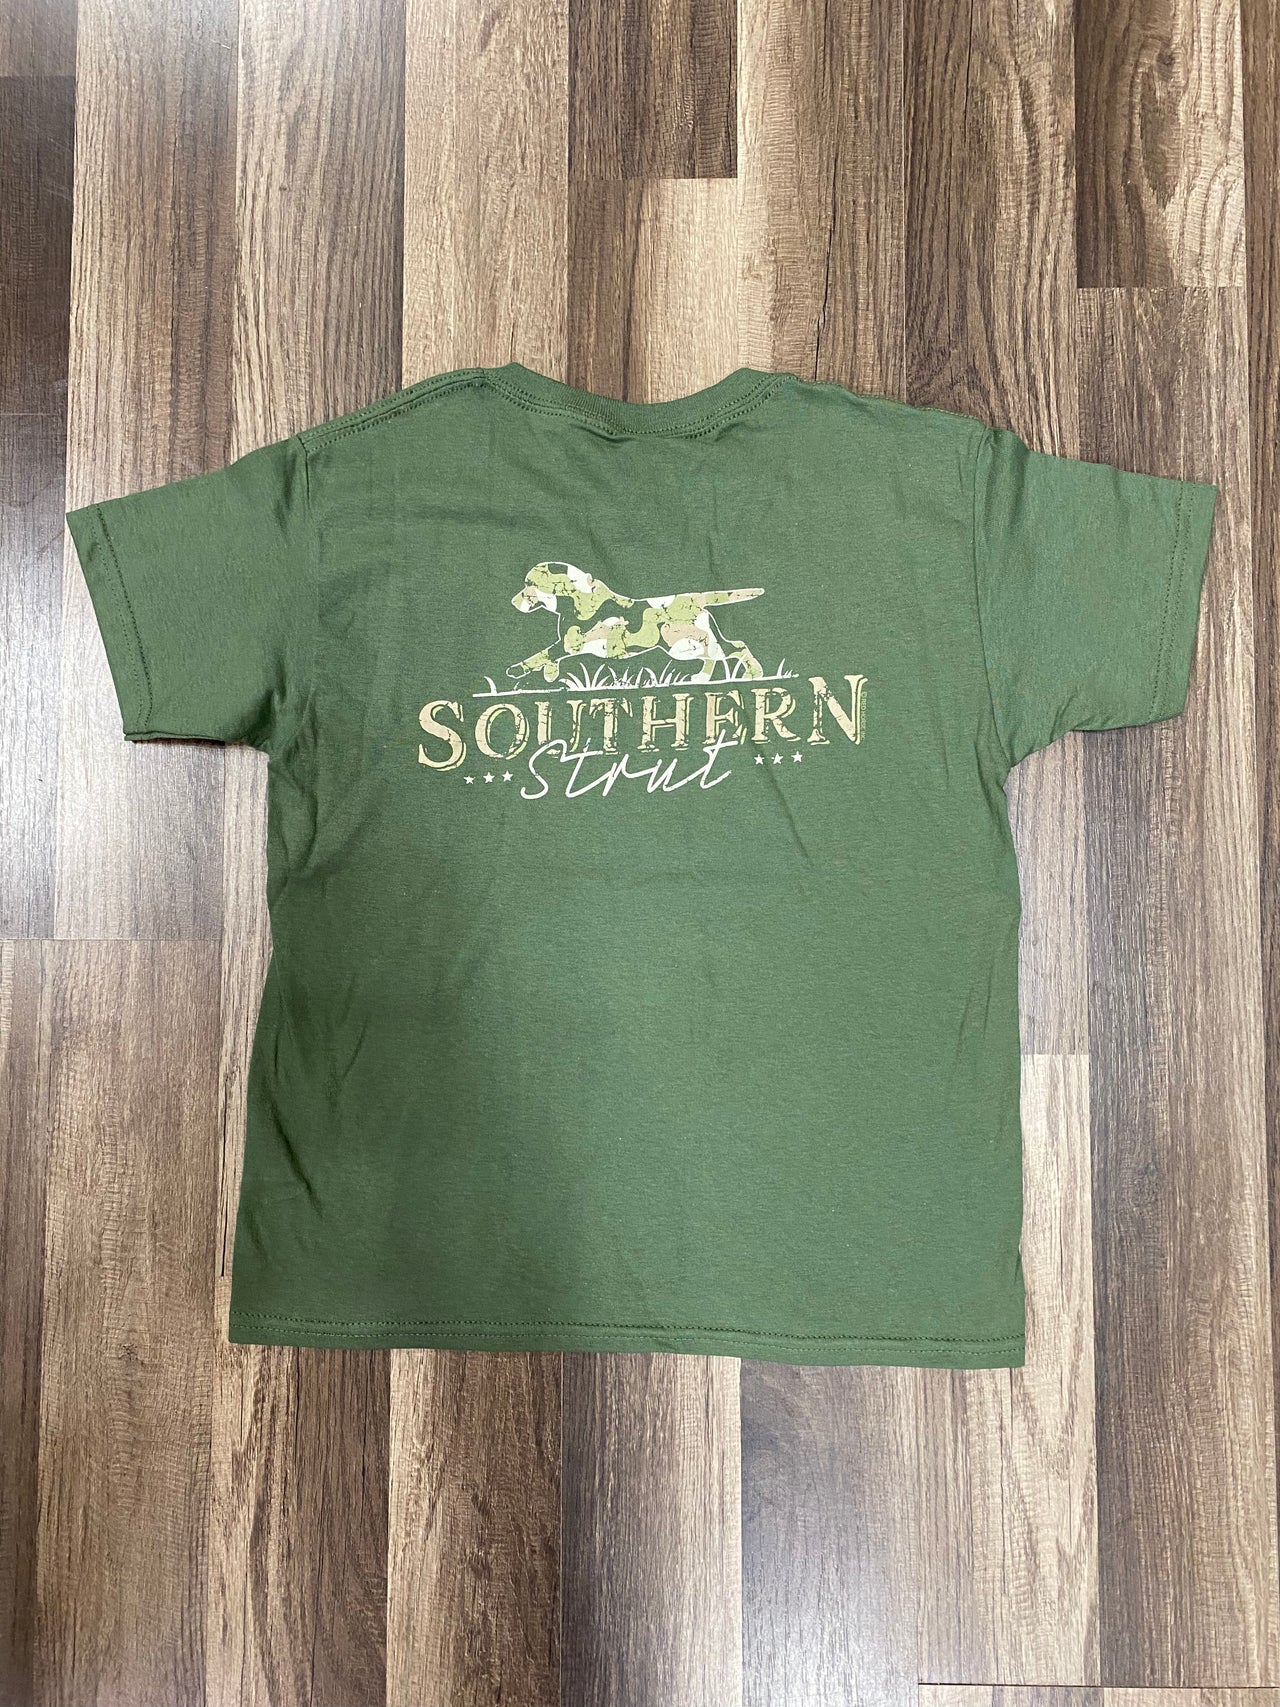 Youth T-Shirt. Youth Clothes. Camo. Pup. Military Green.